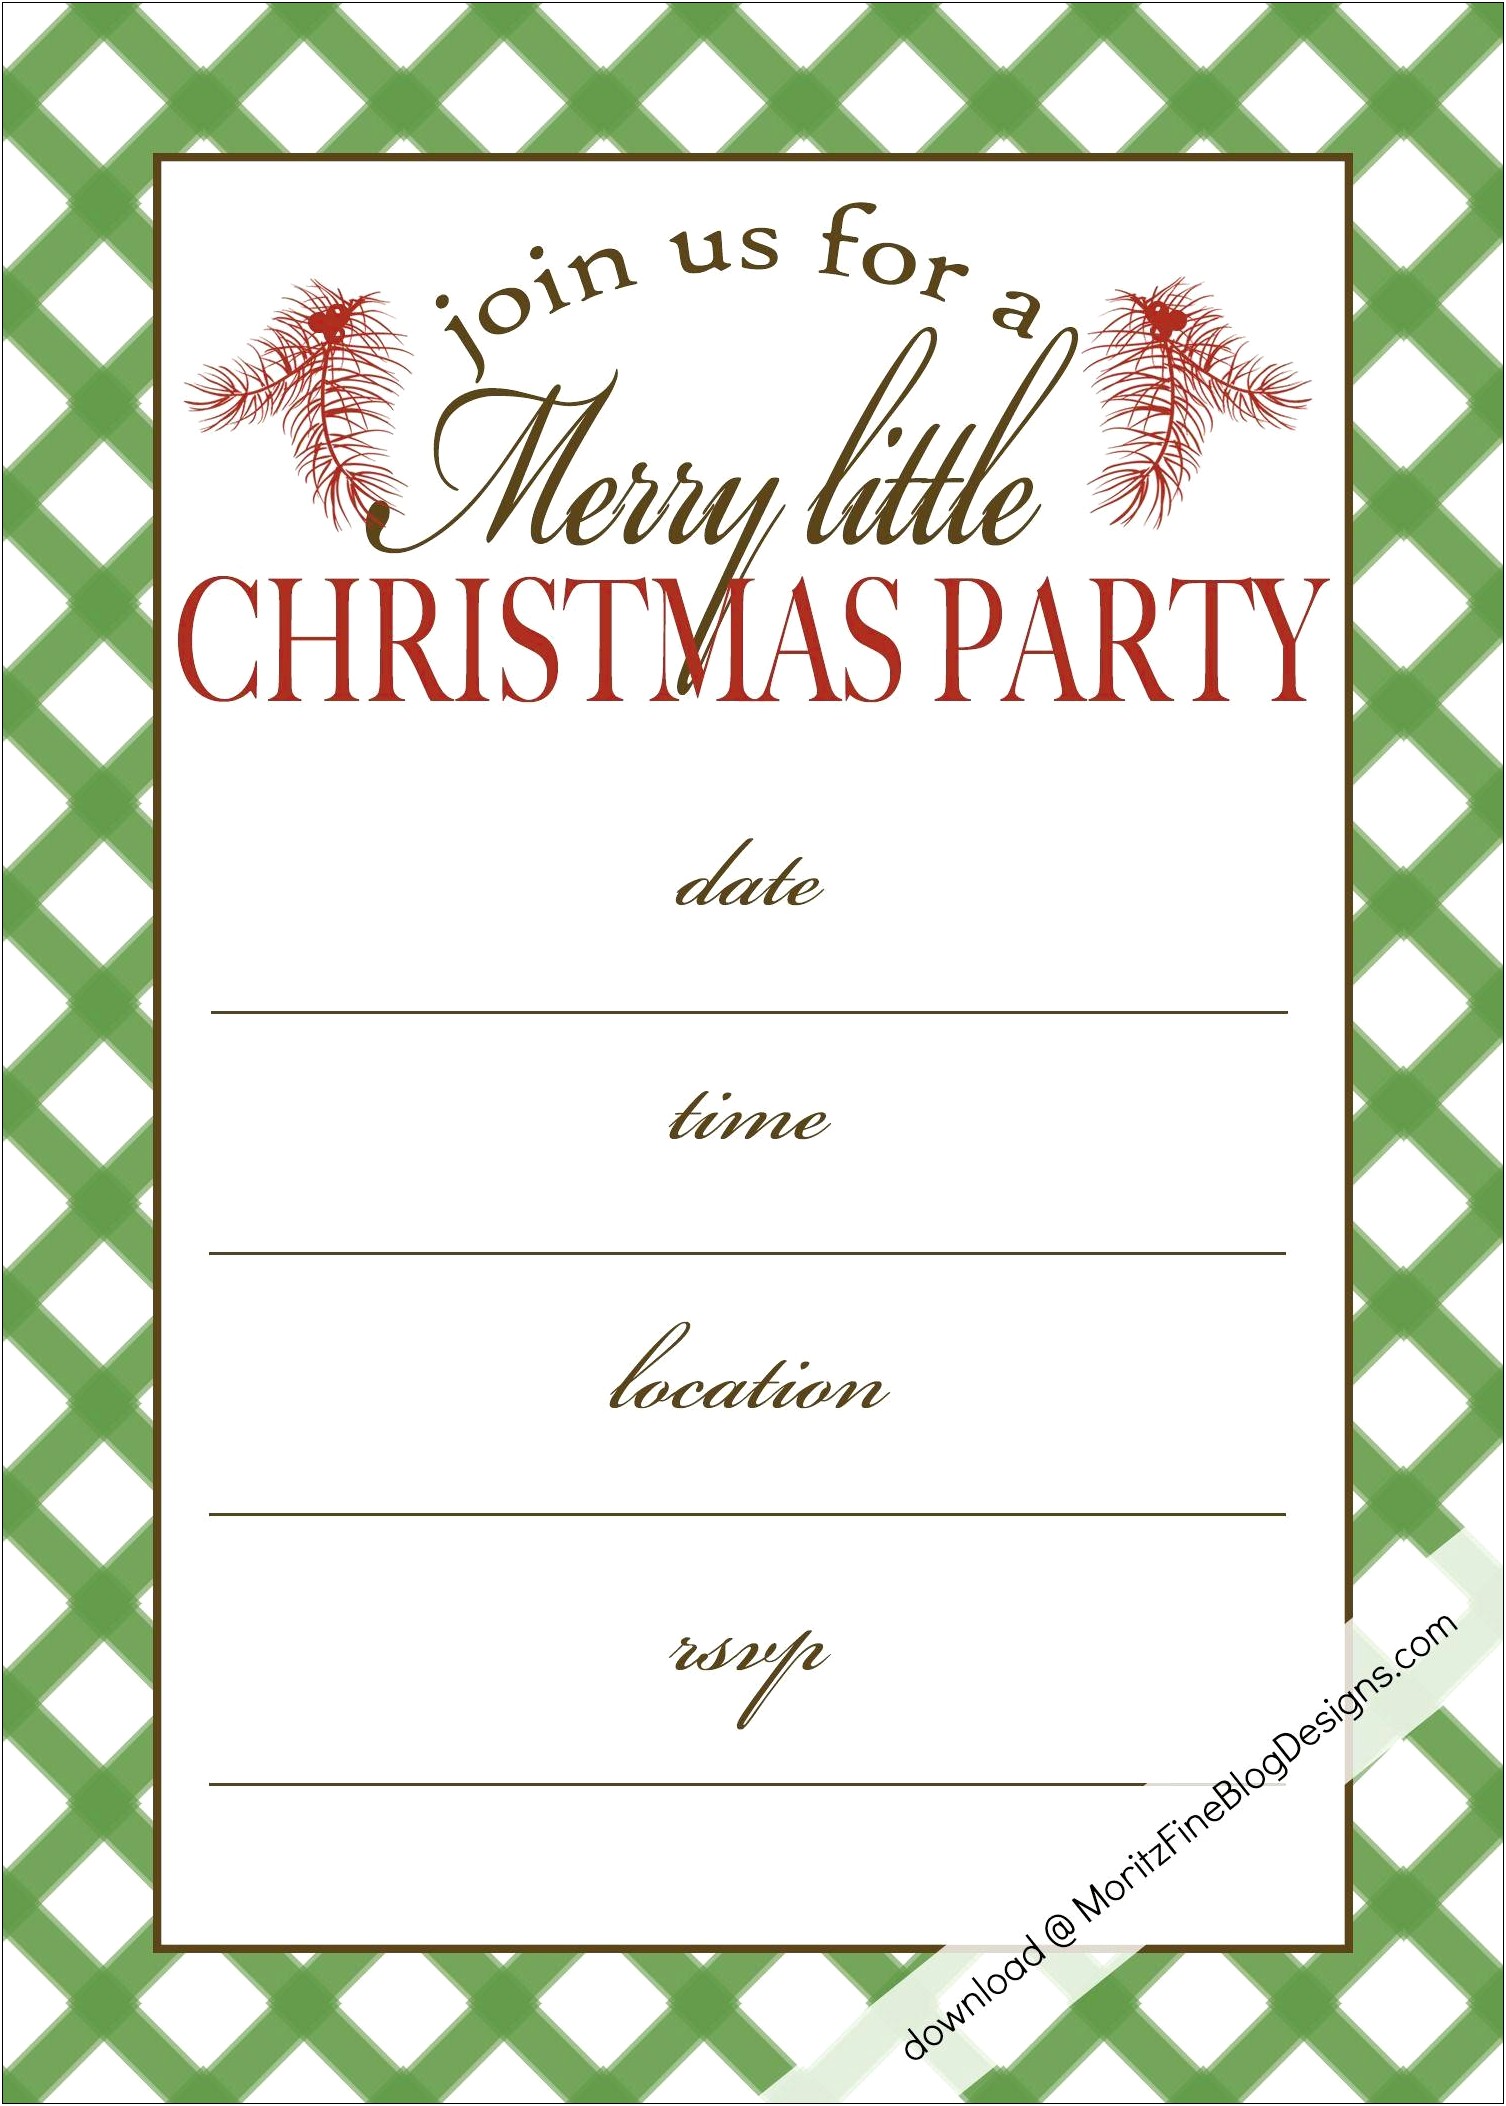 Corporate Christmas Party Invitation Templates Free